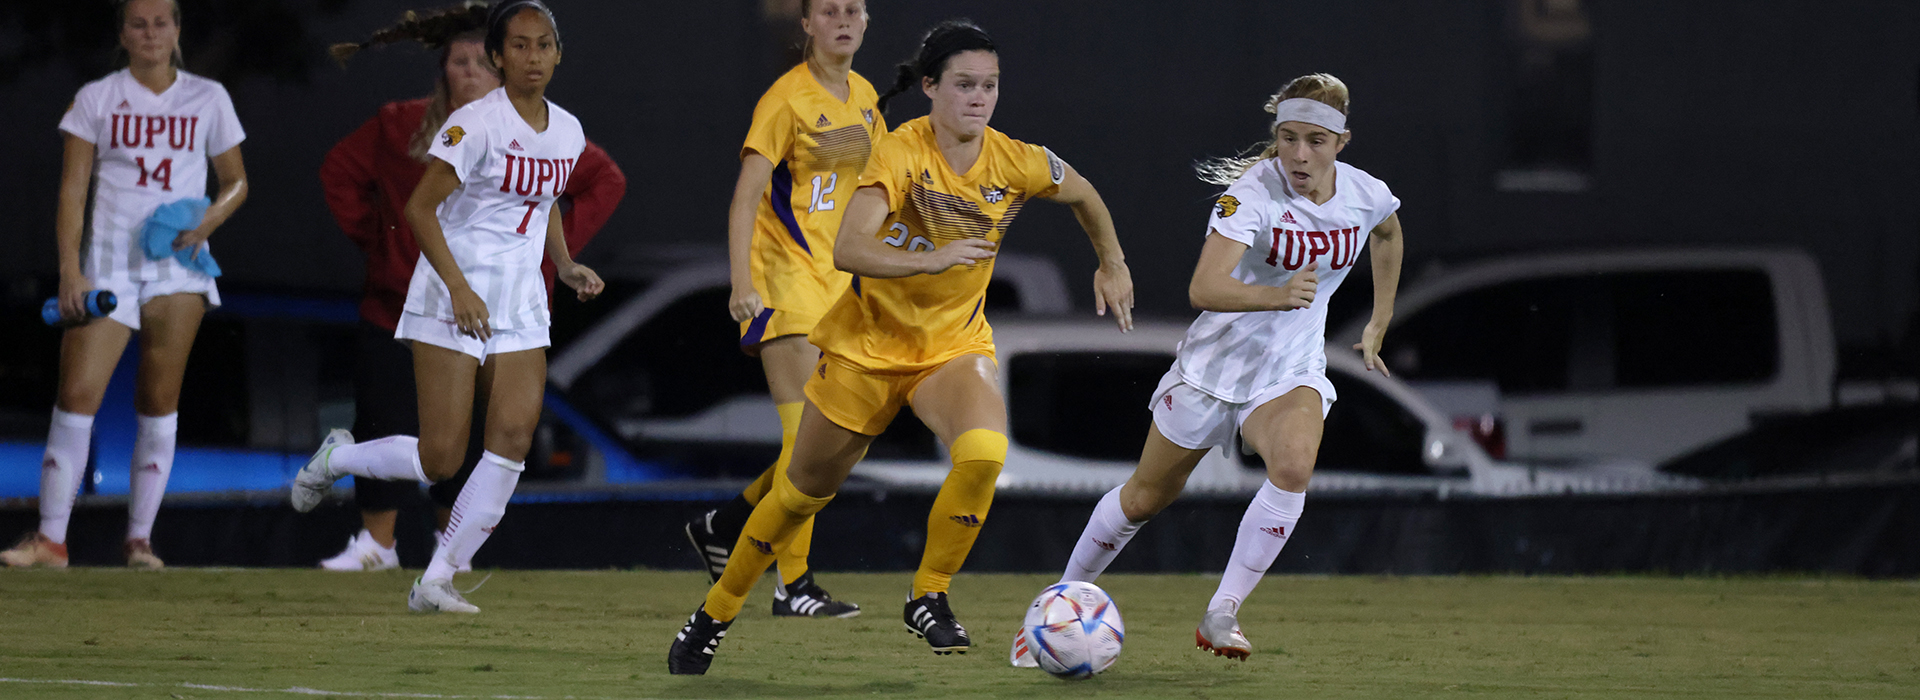 Tech ties it late to come away with 1-1 draw at Chattanooga